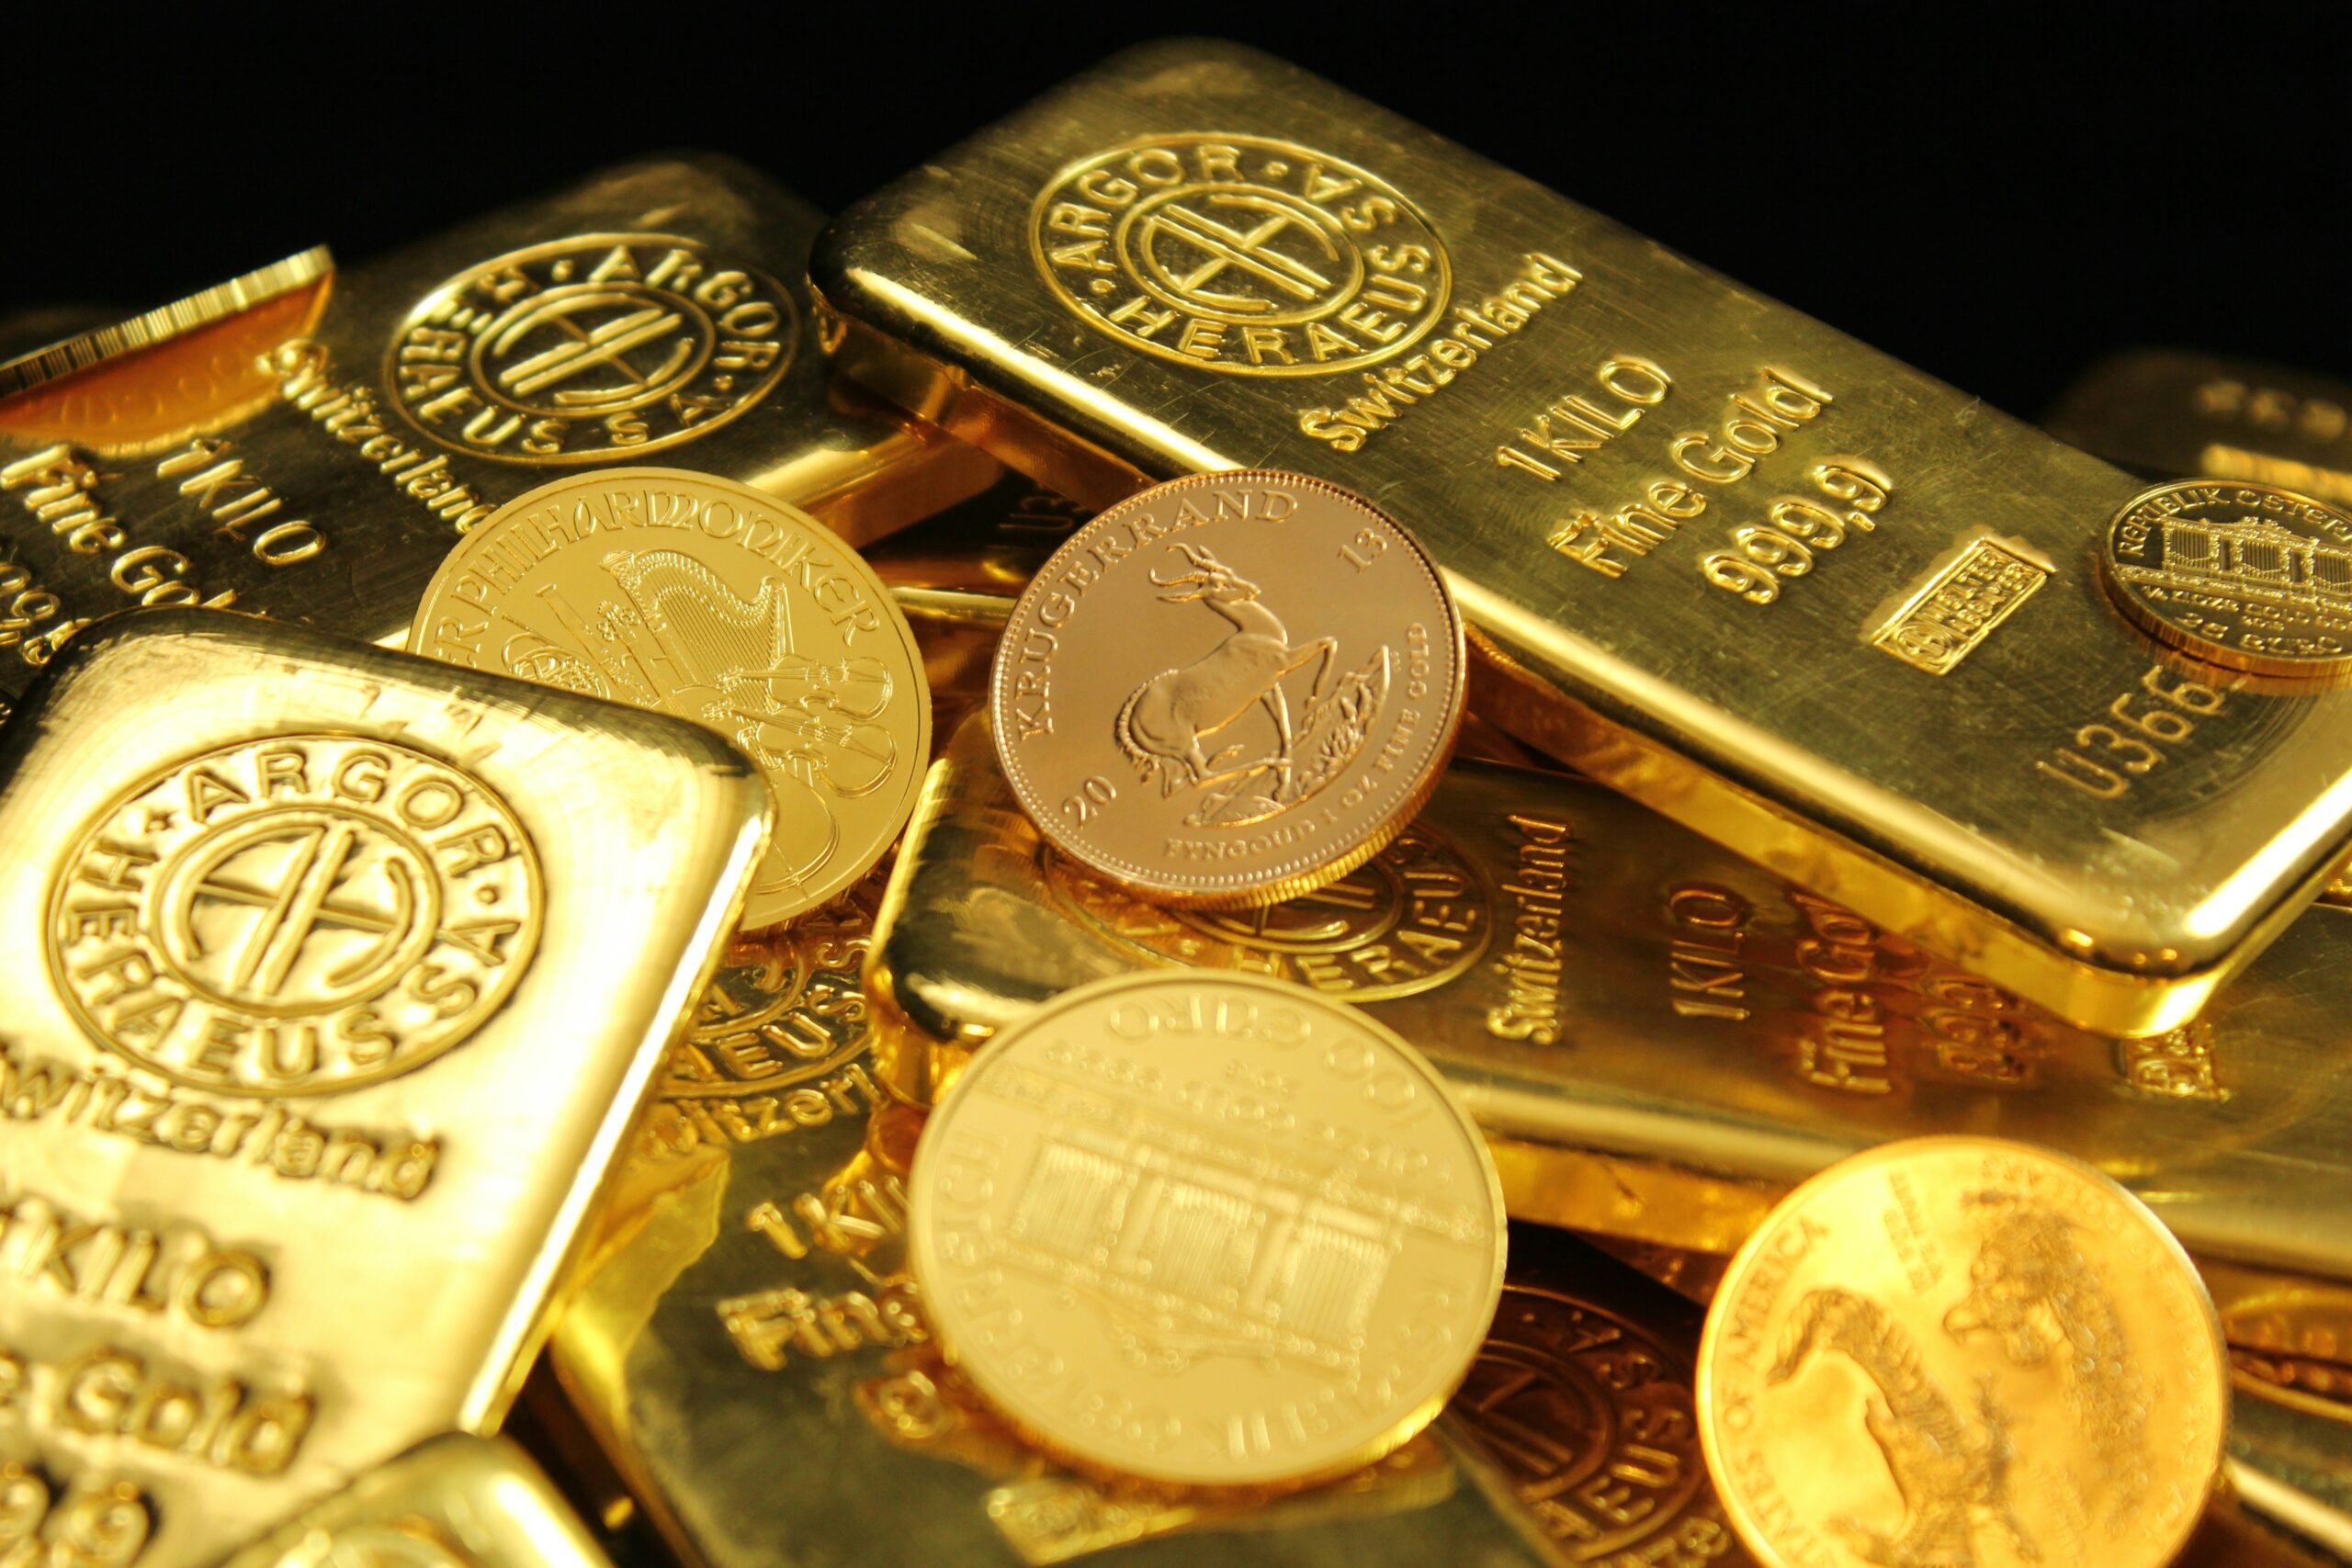 Exploring Investment Options: American Hartford Gold Review and Its Impact